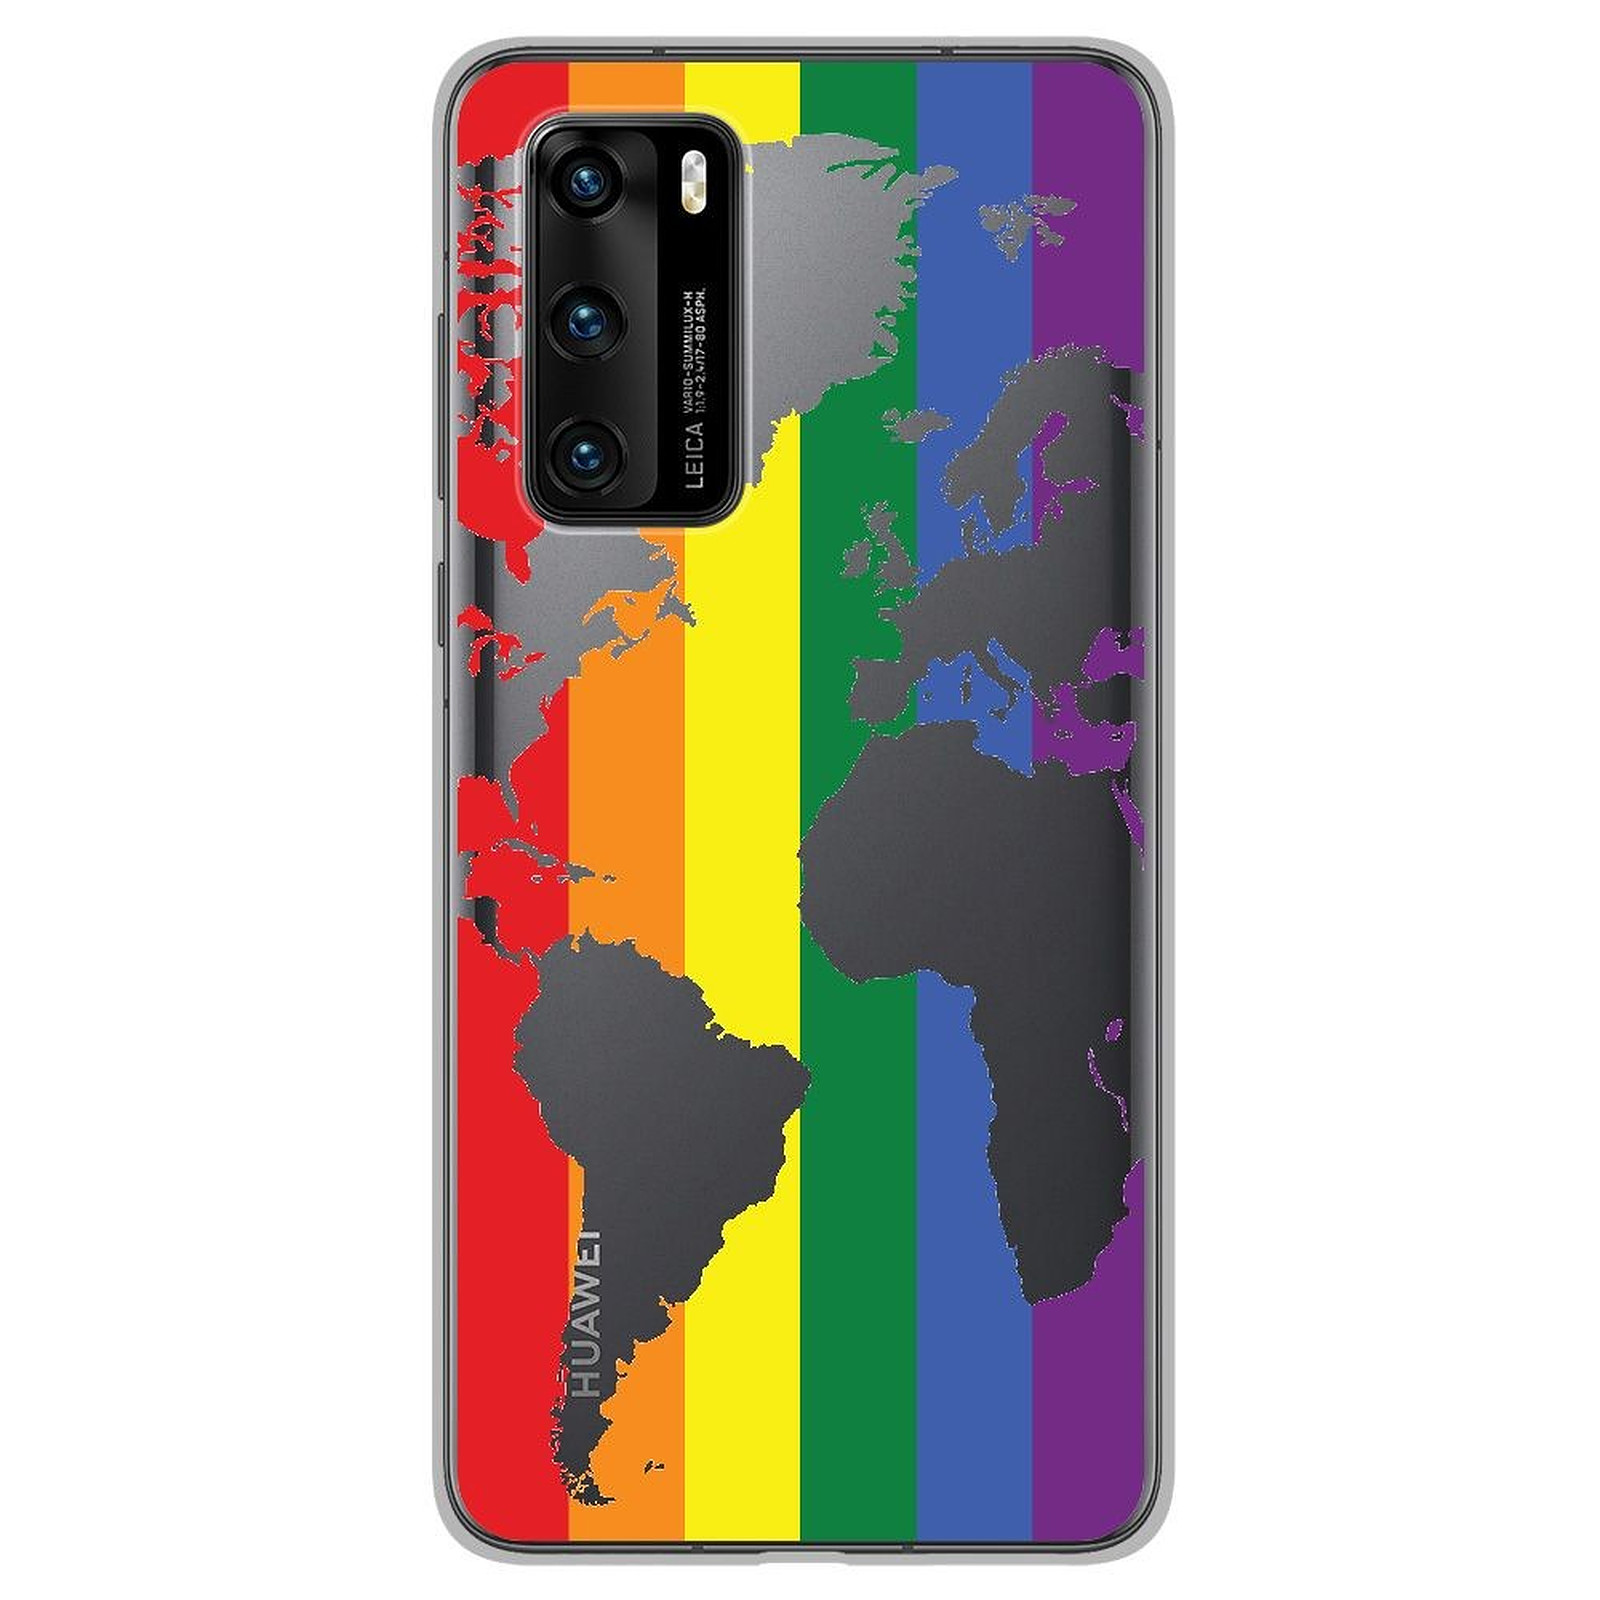 1001 Coques Coque silicone gel Huawei P40 motif Map LGBT - Coque telephone 1001Coques